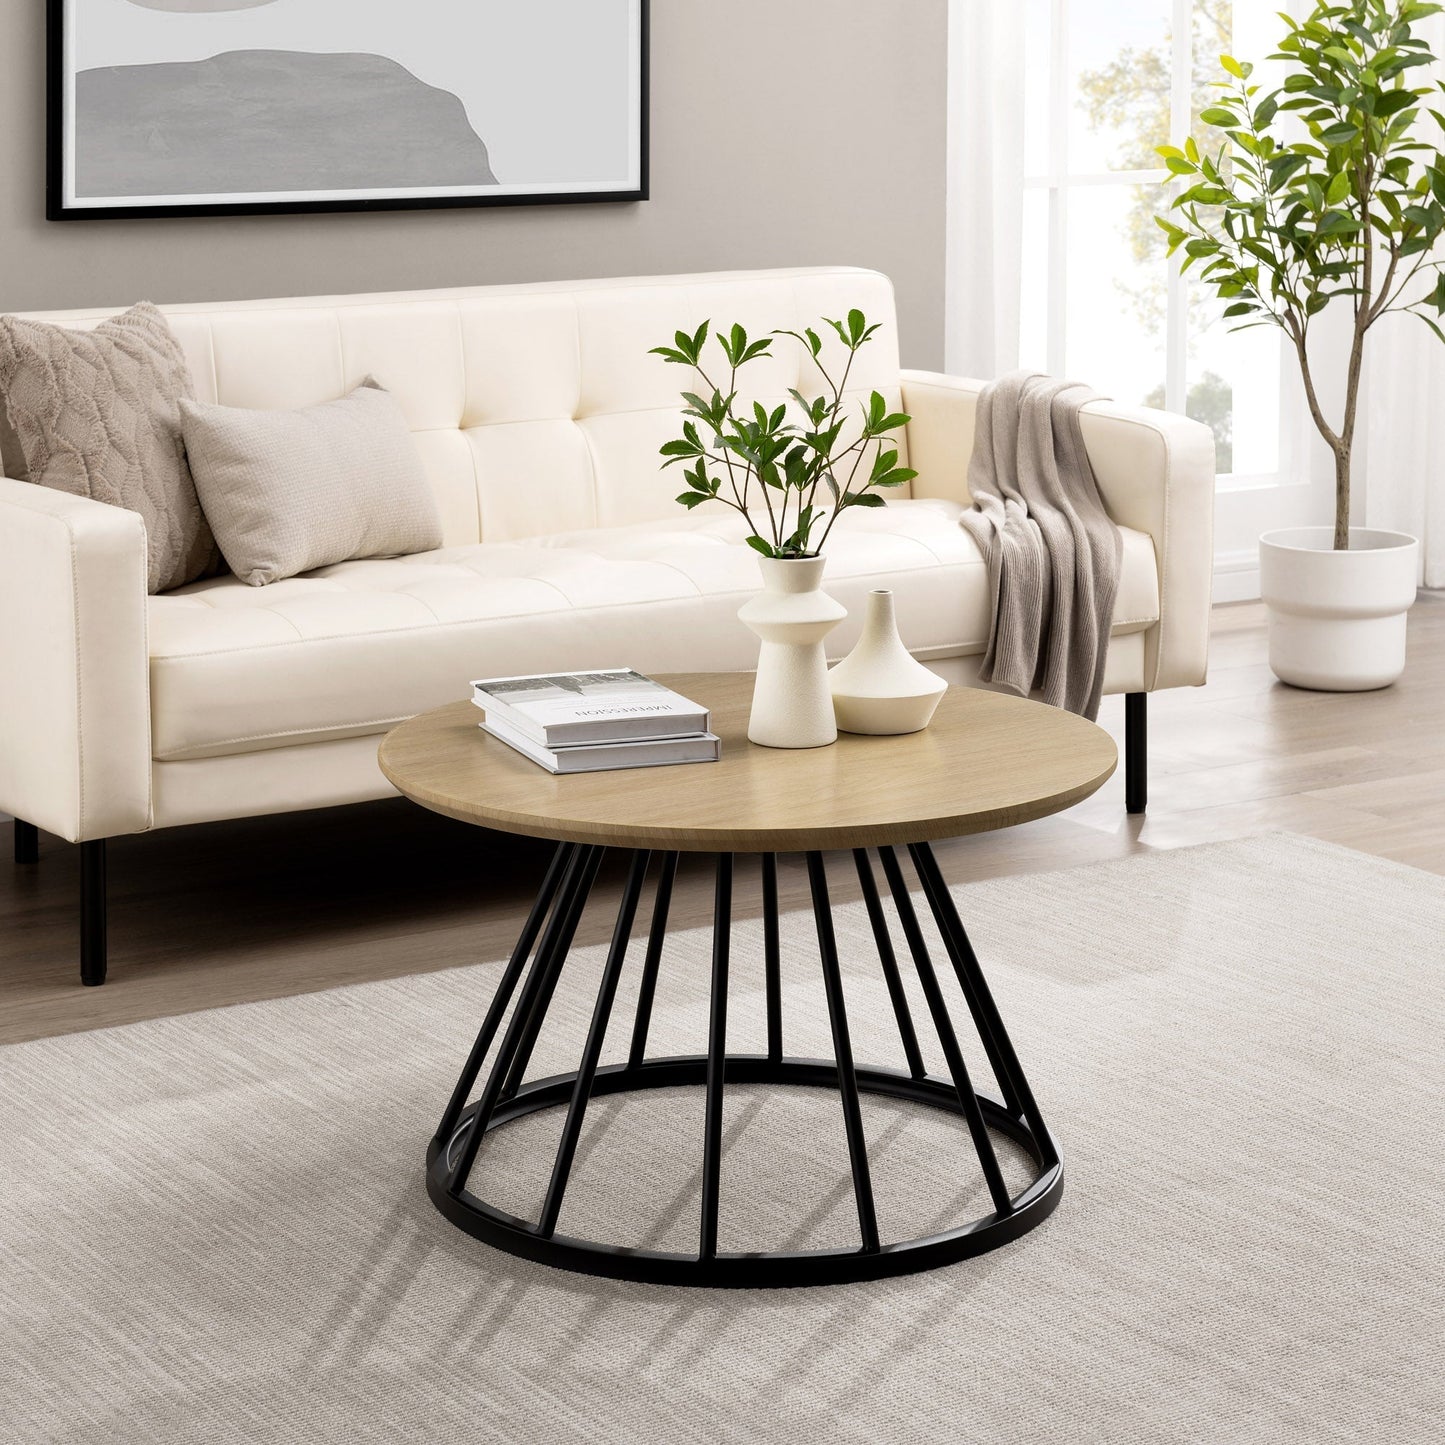 Vivian Modern Round Coffee Table with Metal Base